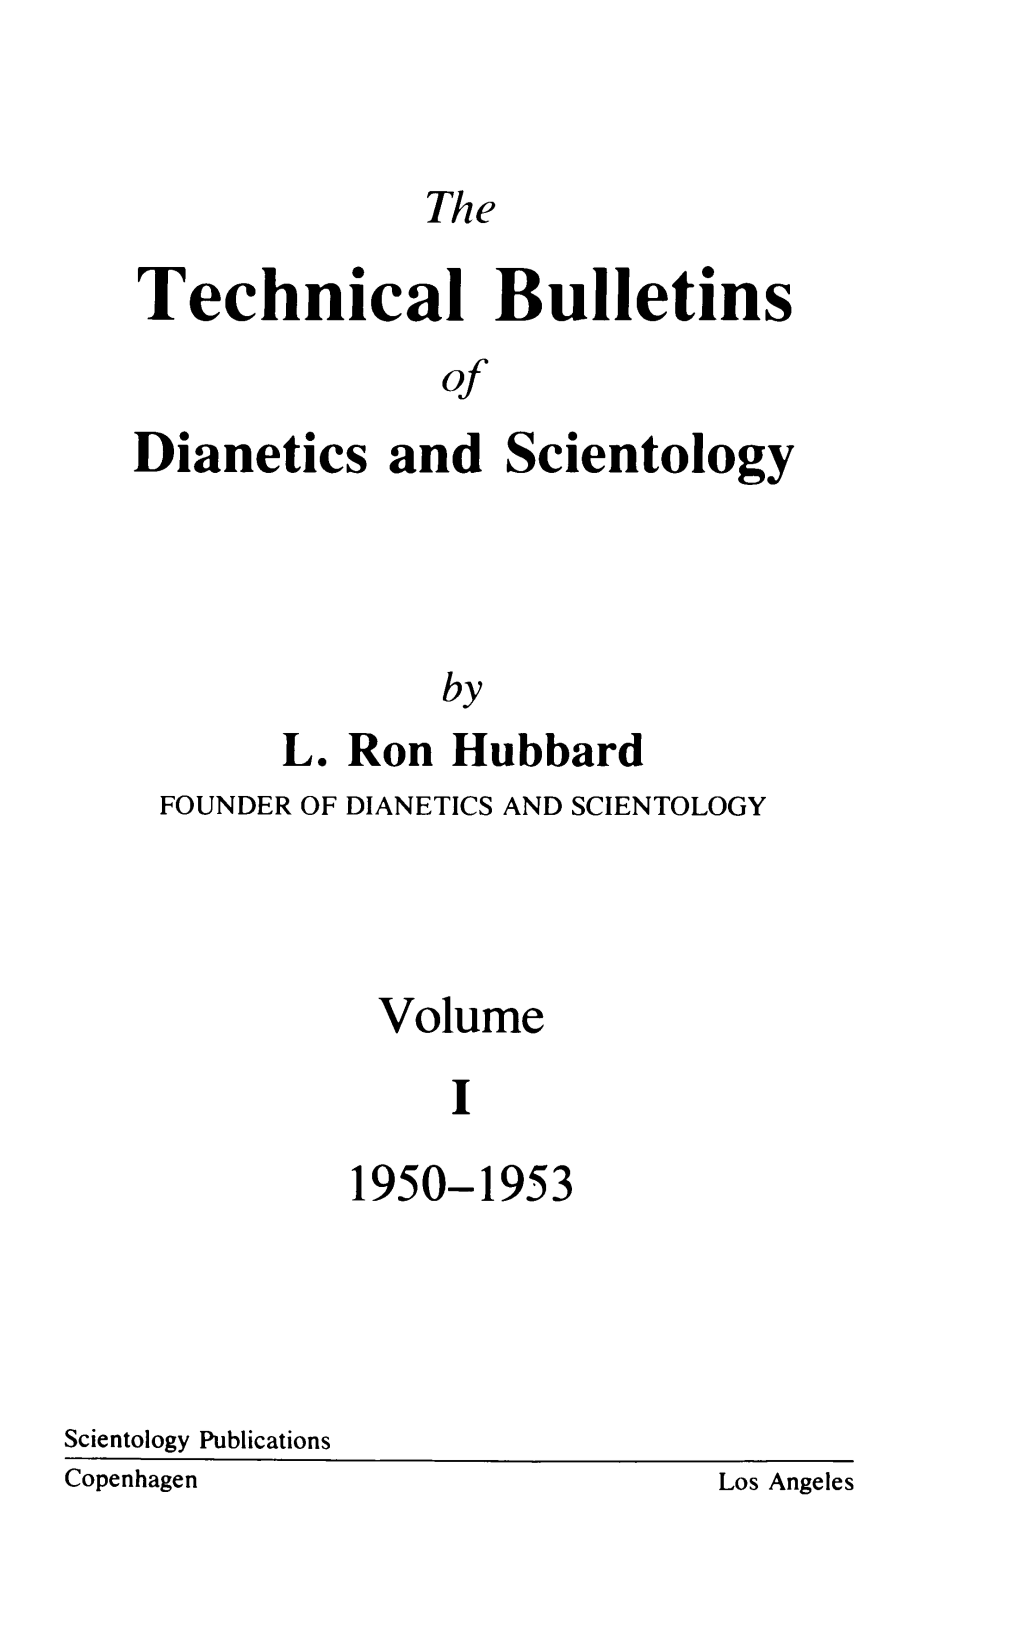 Technical Bulletins of Dianetics and Scientology